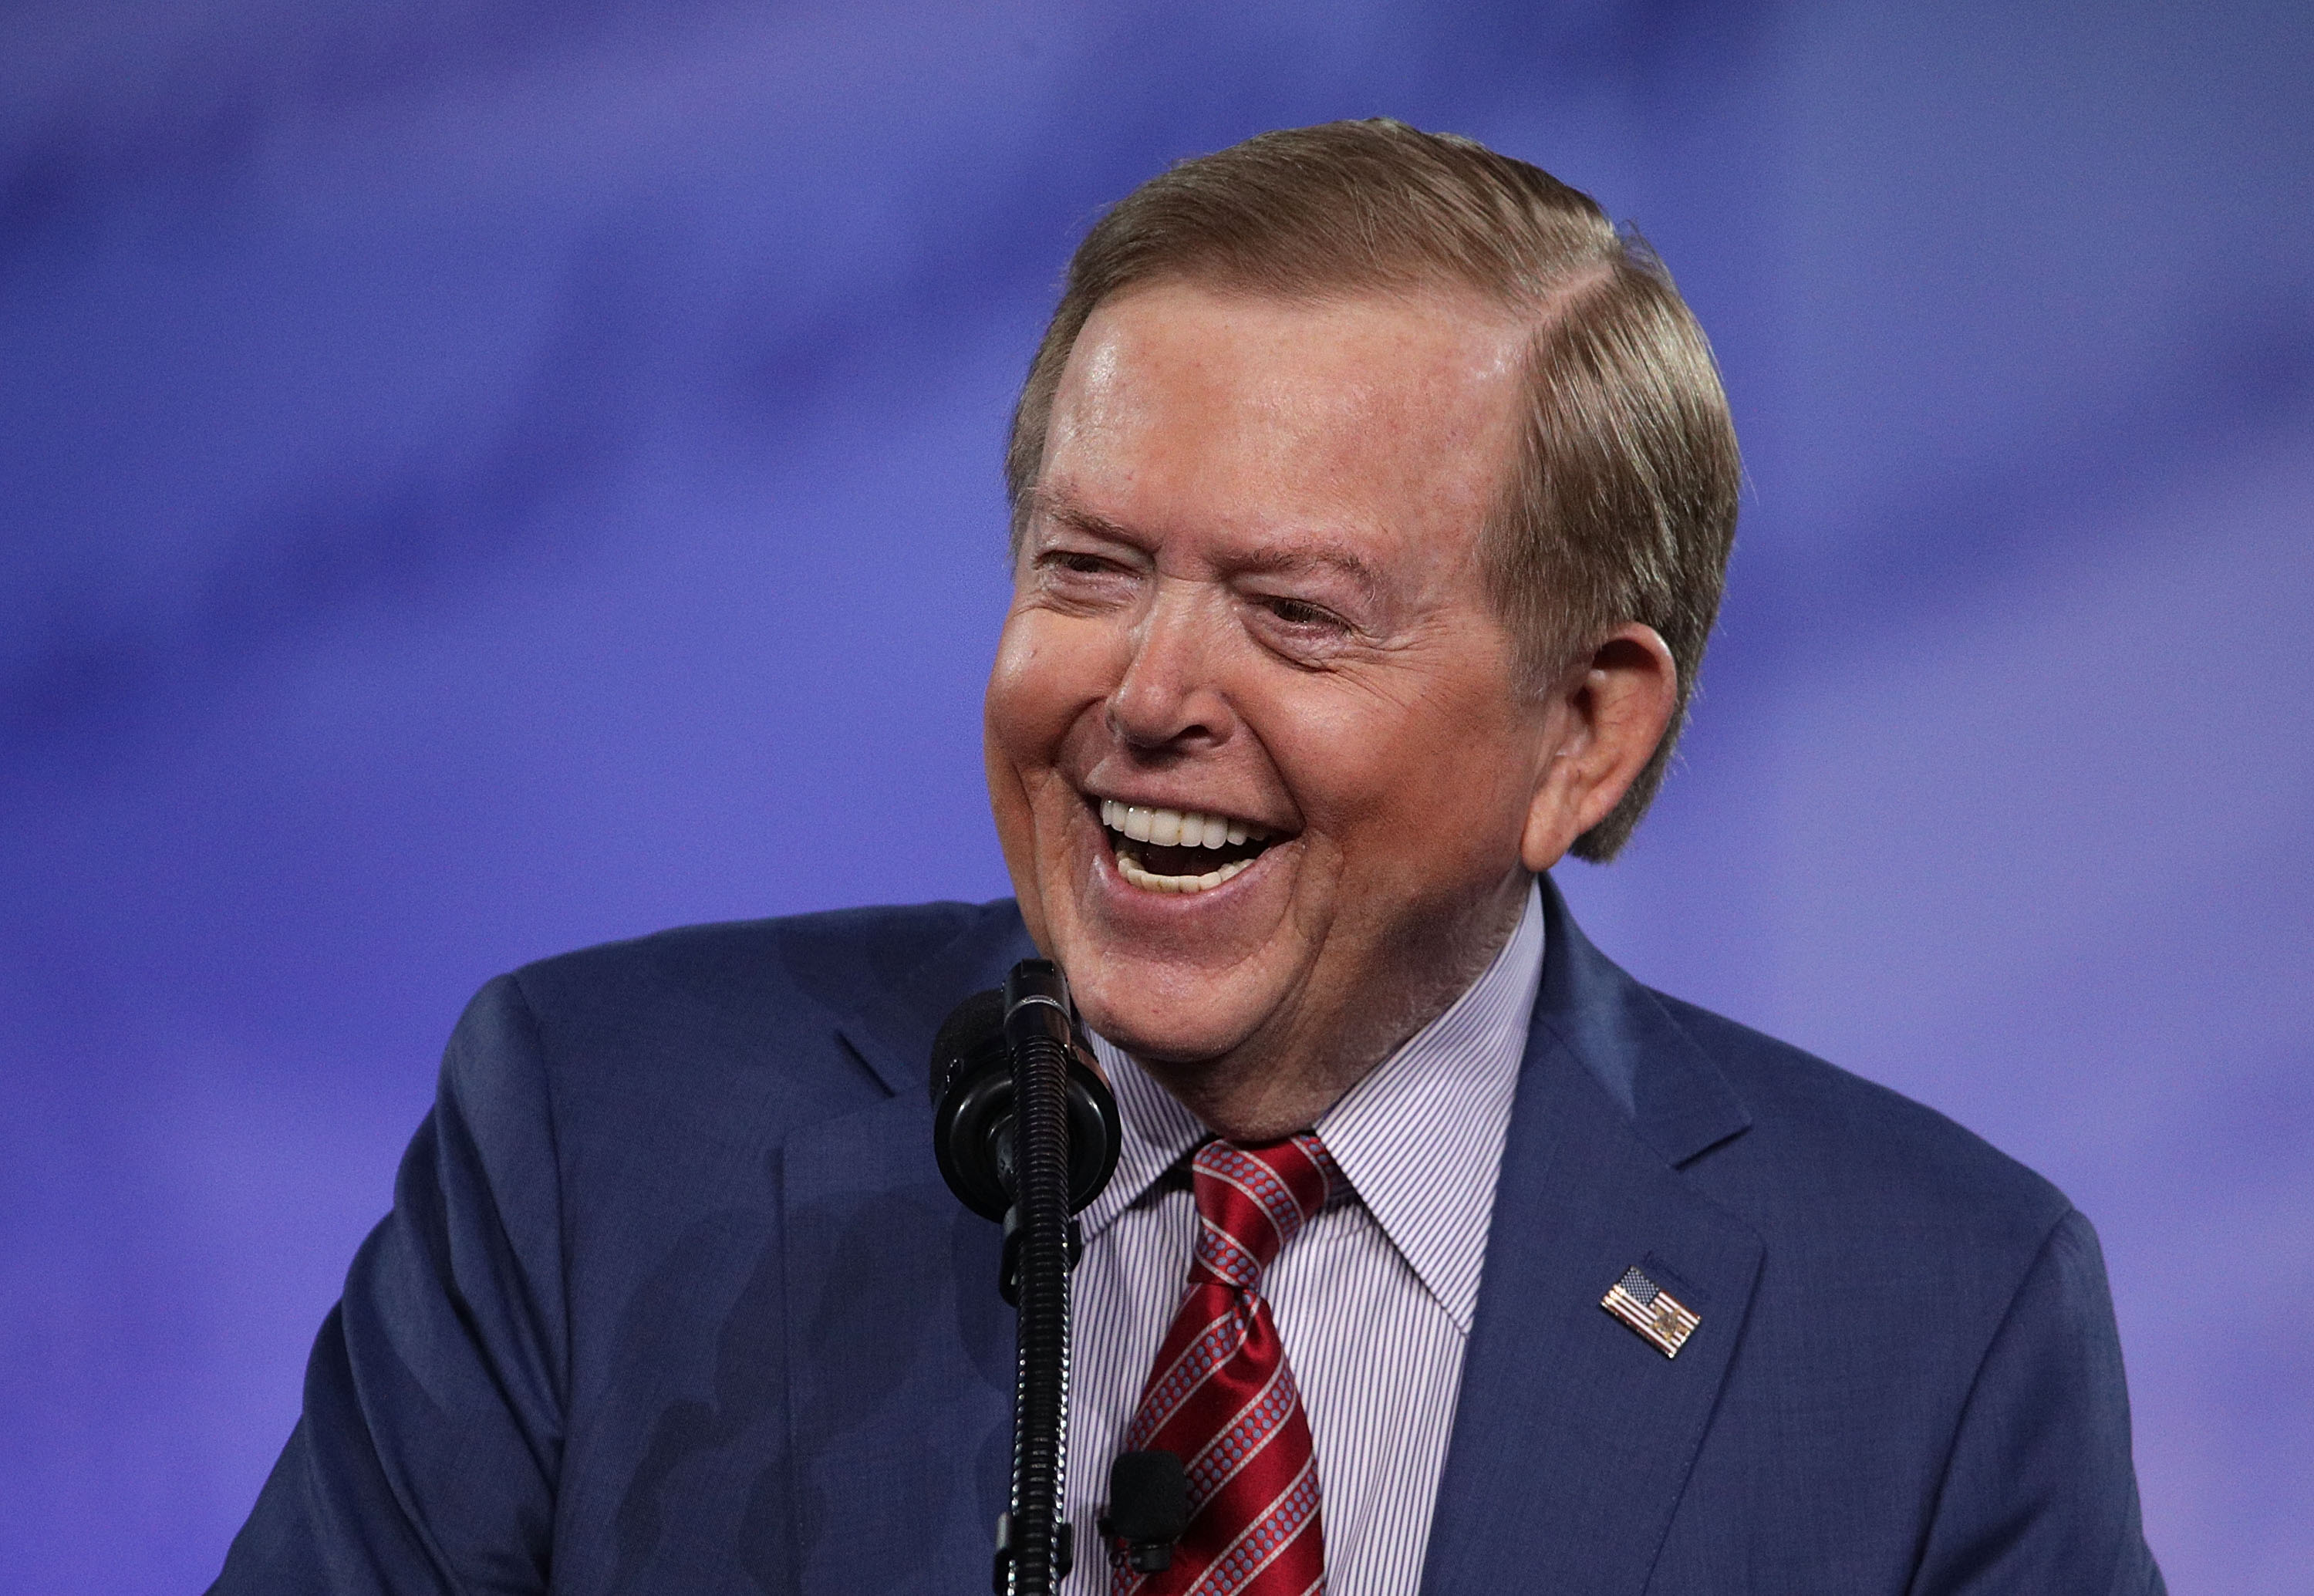 NATIONAL HARBOR, MD - FEBRUARY 24: Lou Dobbs of Fox Business Network speaks during the Conservative Political Action Conference at the Gaylord National Resort and Convention Center February 24, 2017 in National Harbor, Maryland. Hosted by the American Conservative Union, CPAC is an annual gathering of right wing politicians, commentators and their supporters. (Photo by Alex Wong/Getty Images)